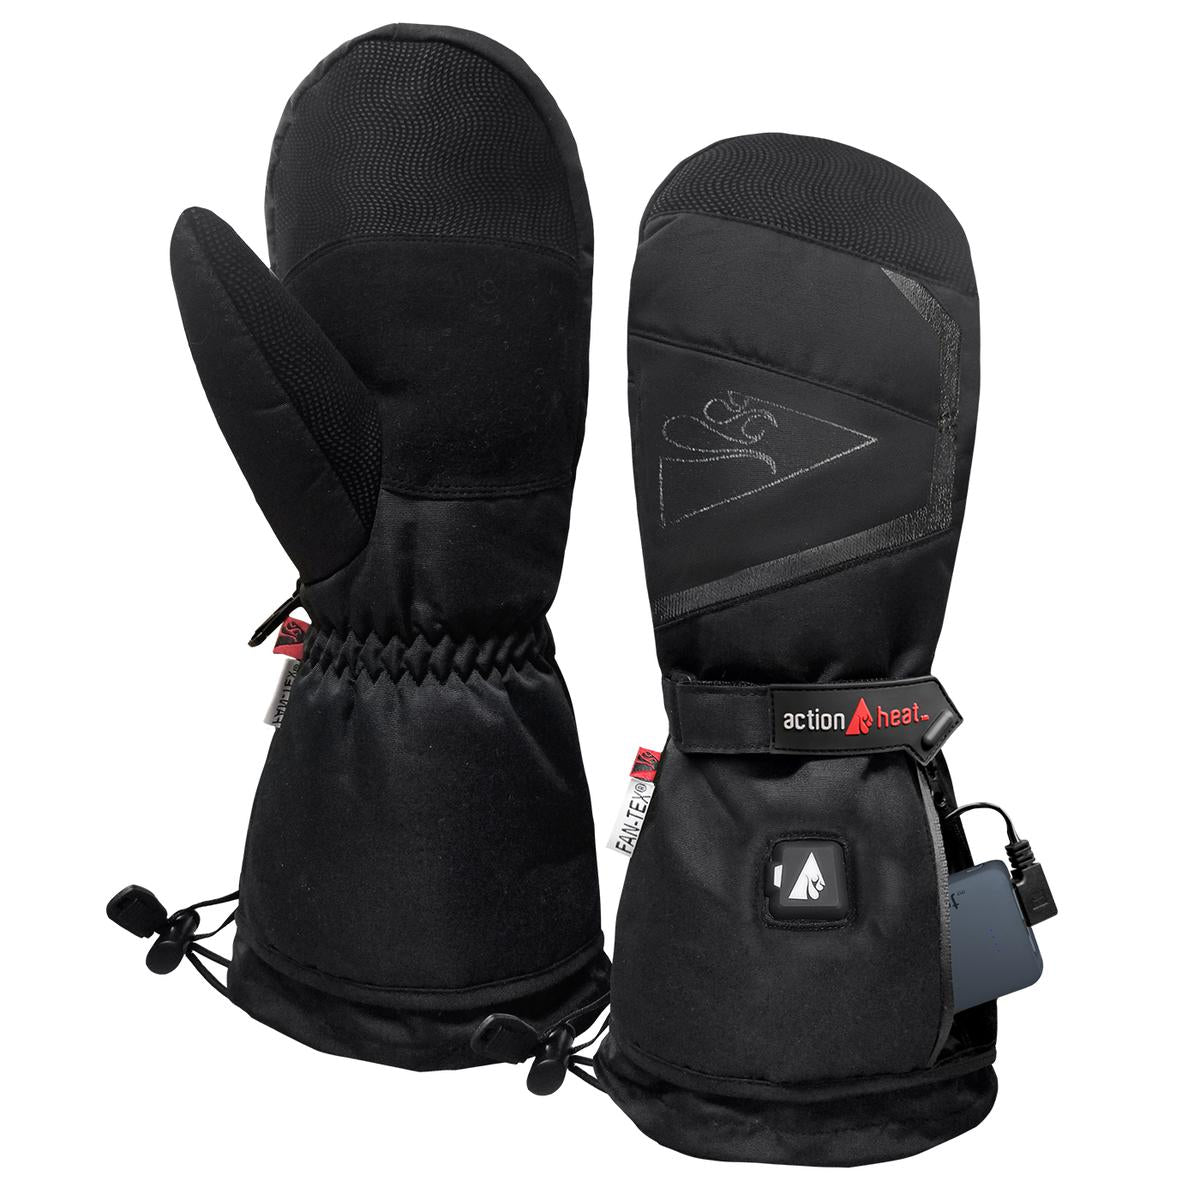 ActionHeat 5V Battery Heated Mittens